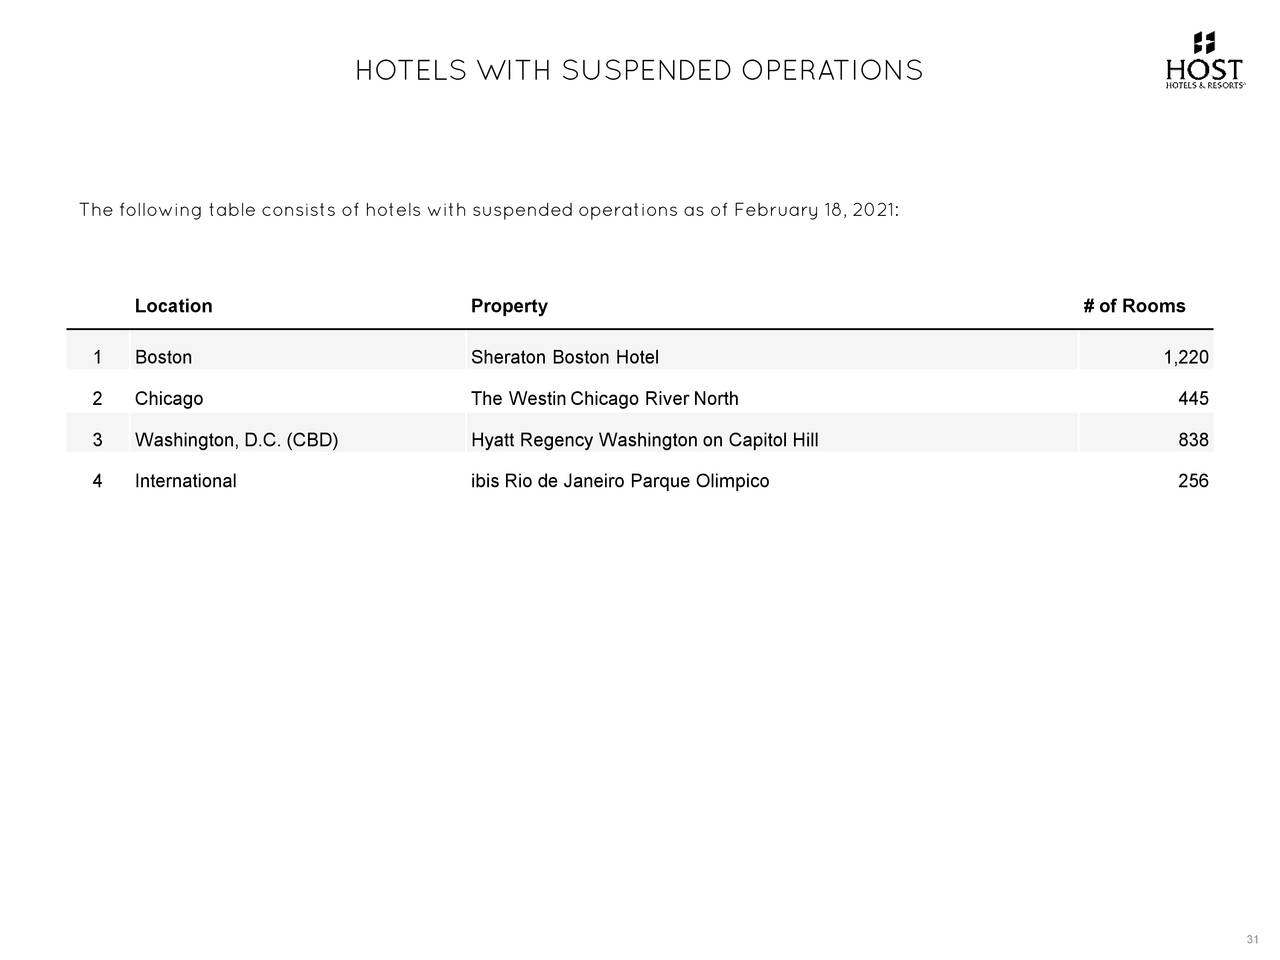 HOTELS WITH SUSPENDED OPERATIONS